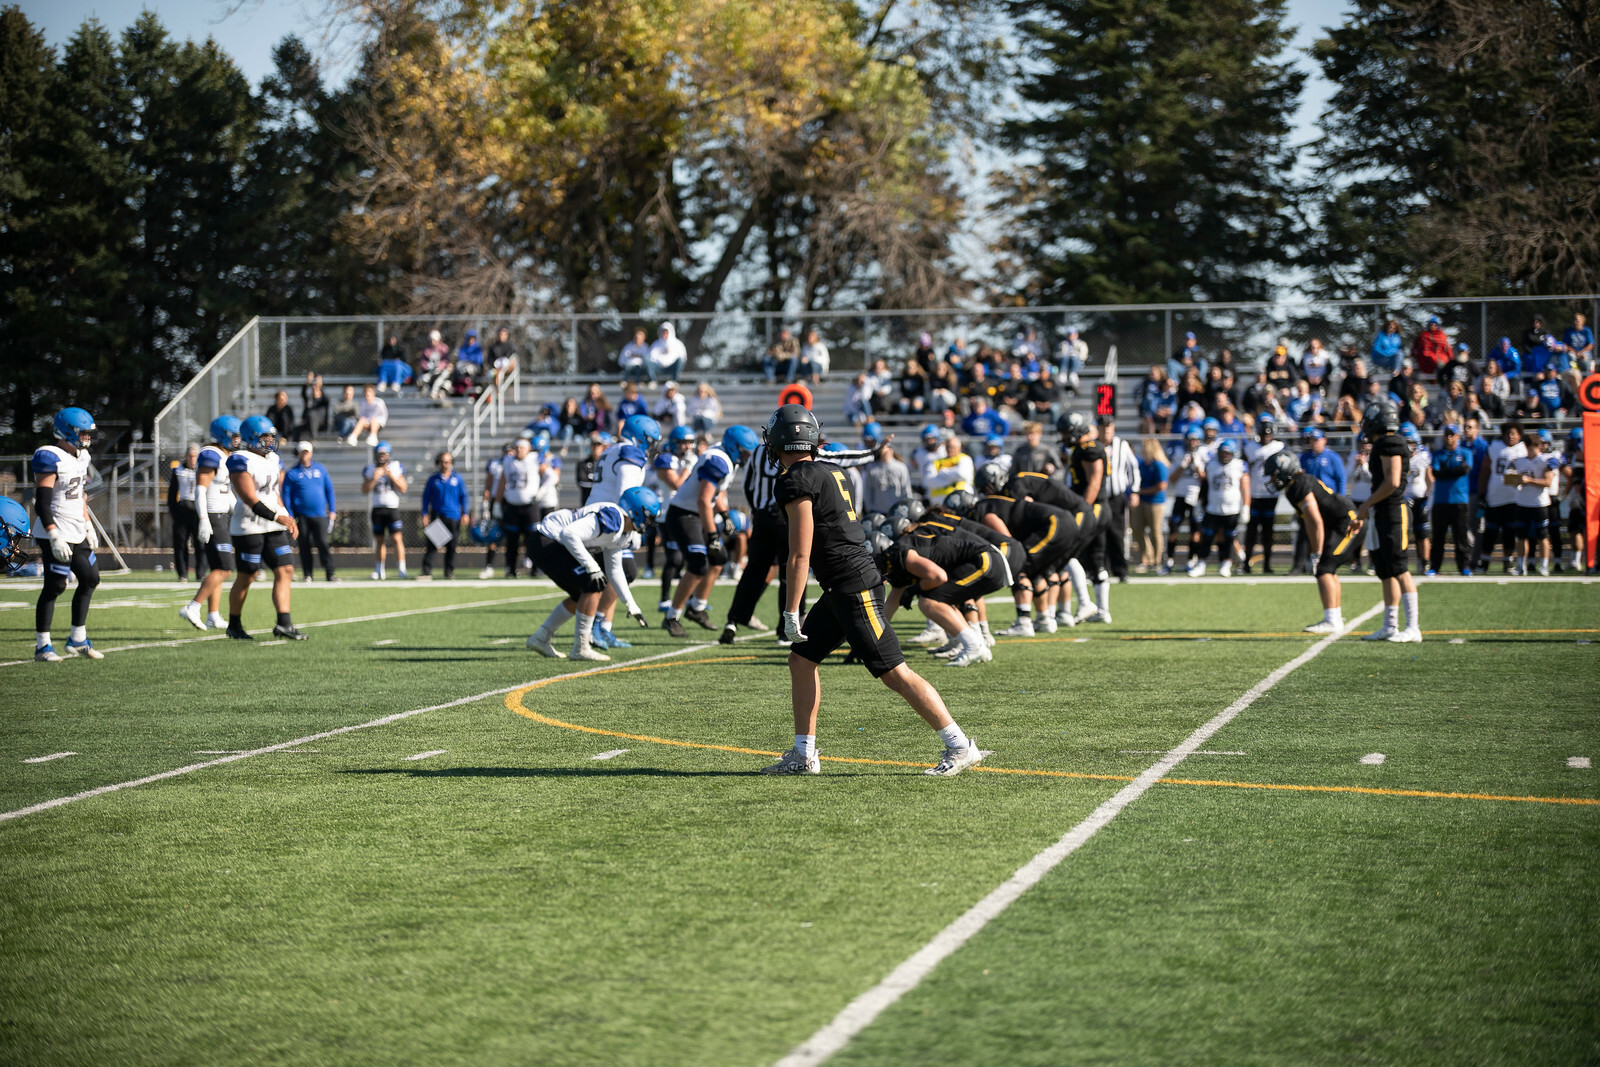 A picture of a Dordt University home football game